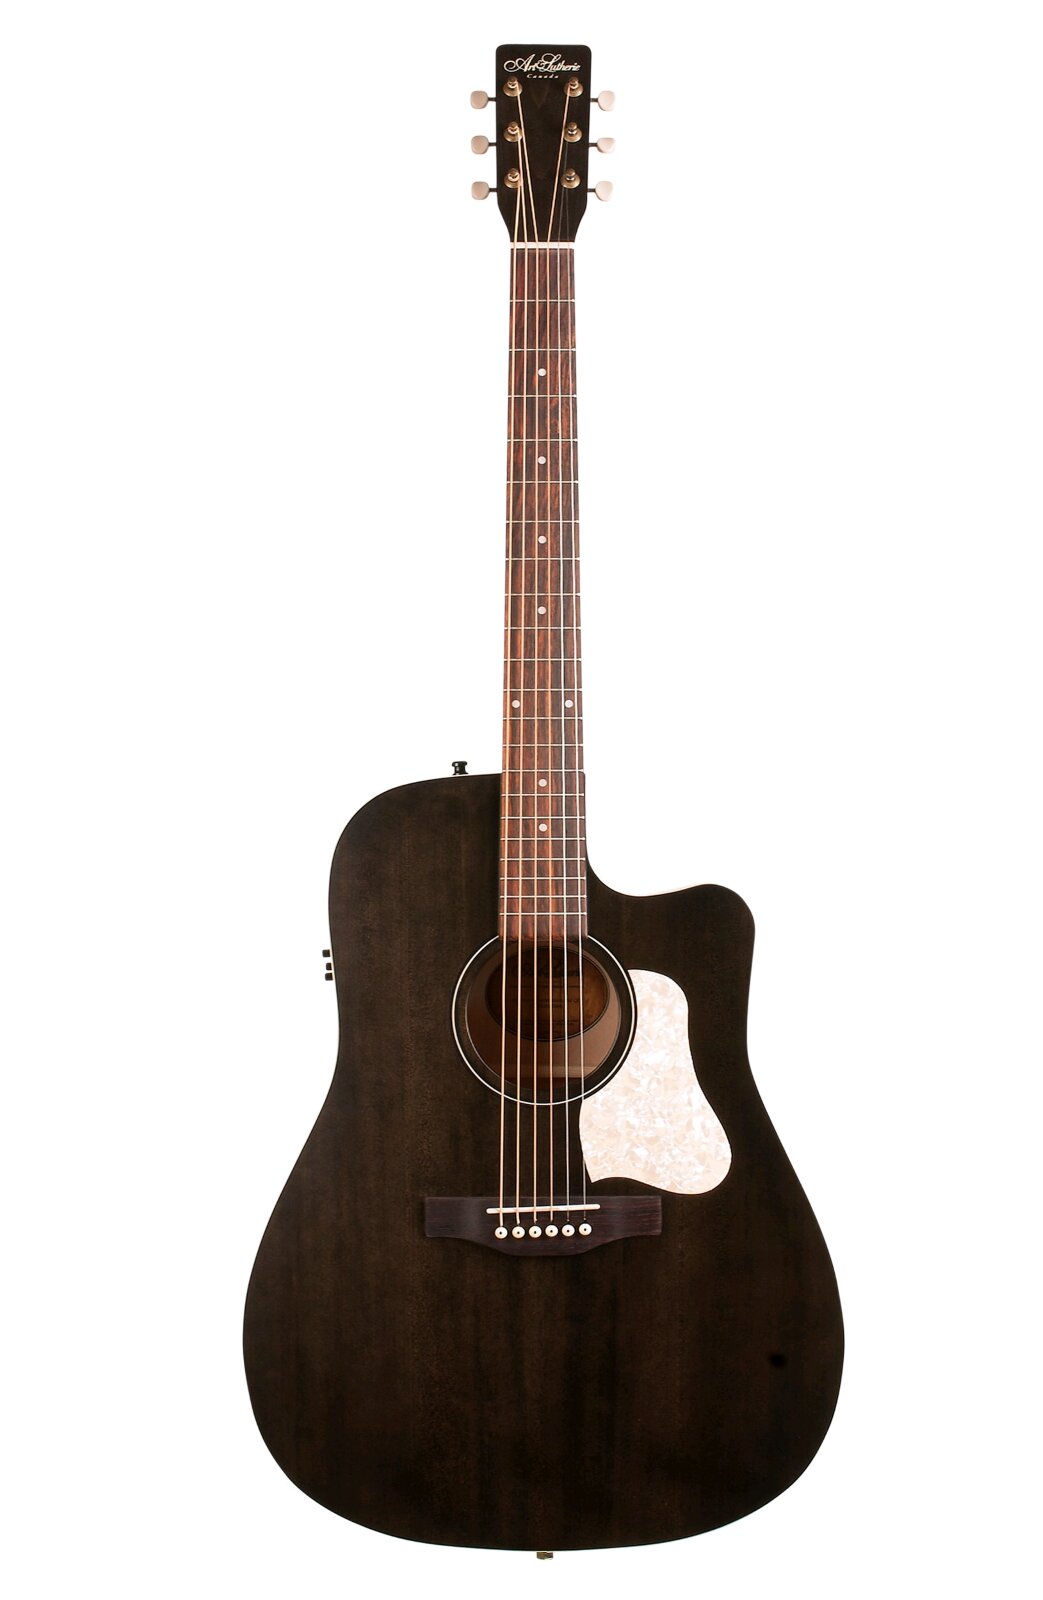 Art & Lutherie Dreadnought 